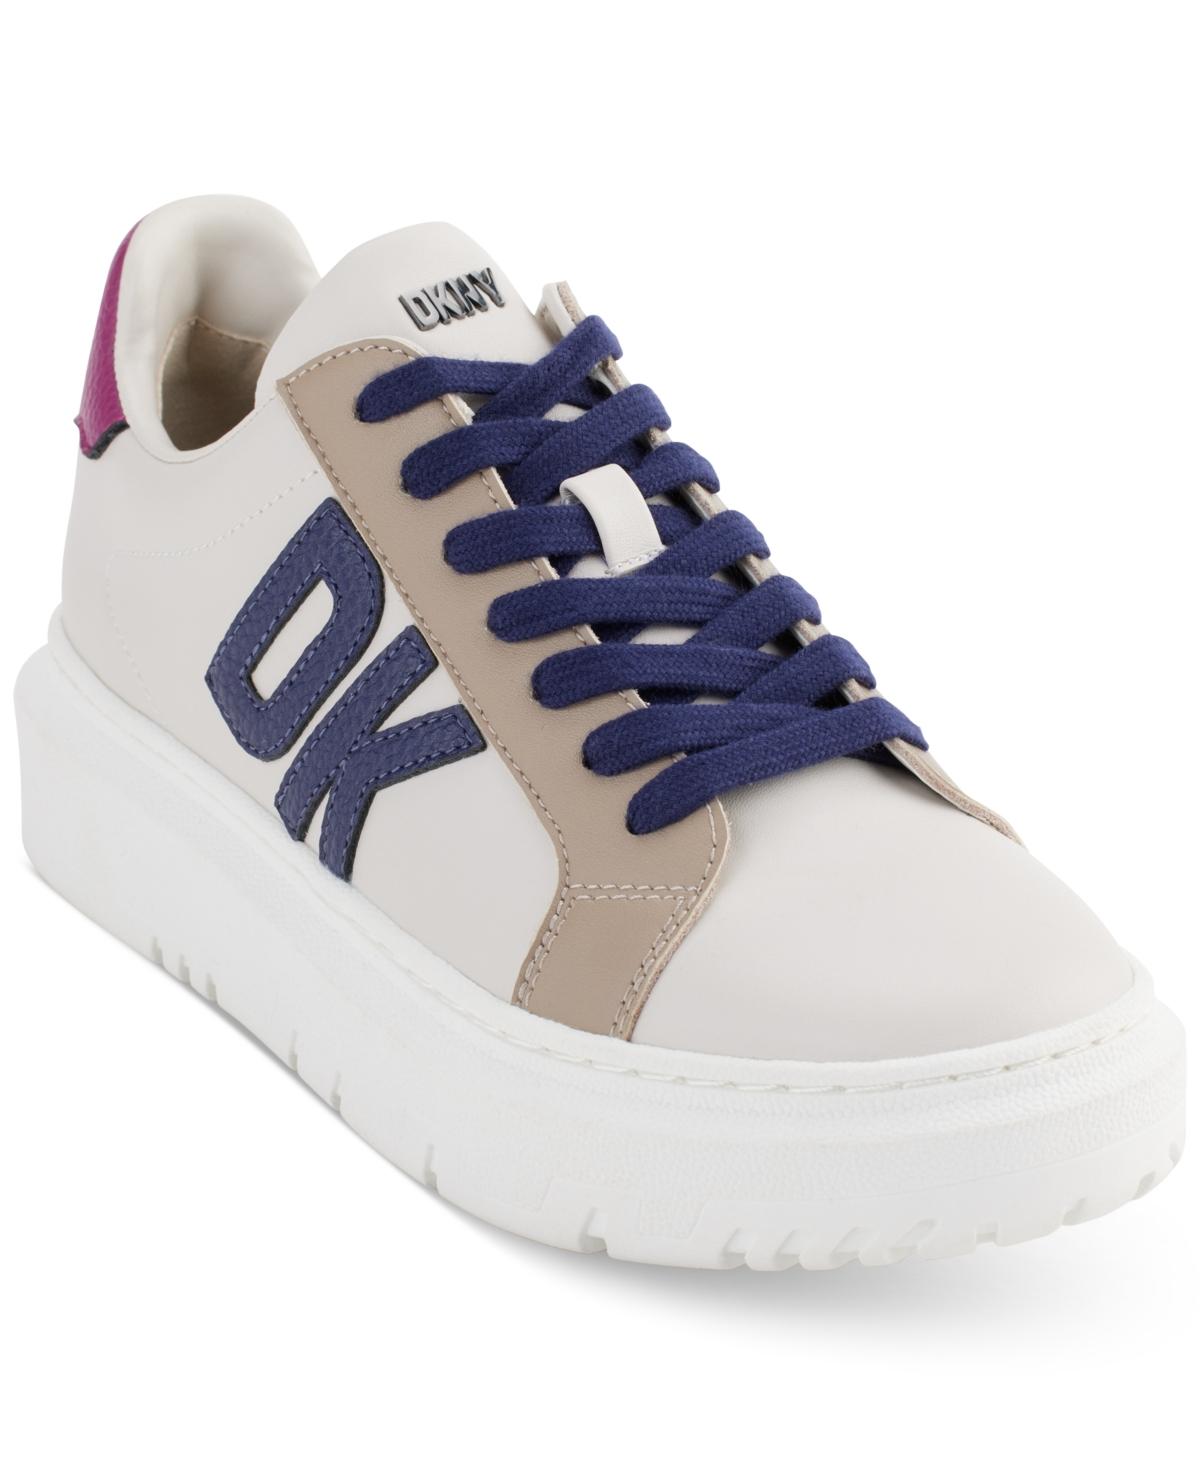 DKNY Marian Lace-up Low-top Sneakers in Blue